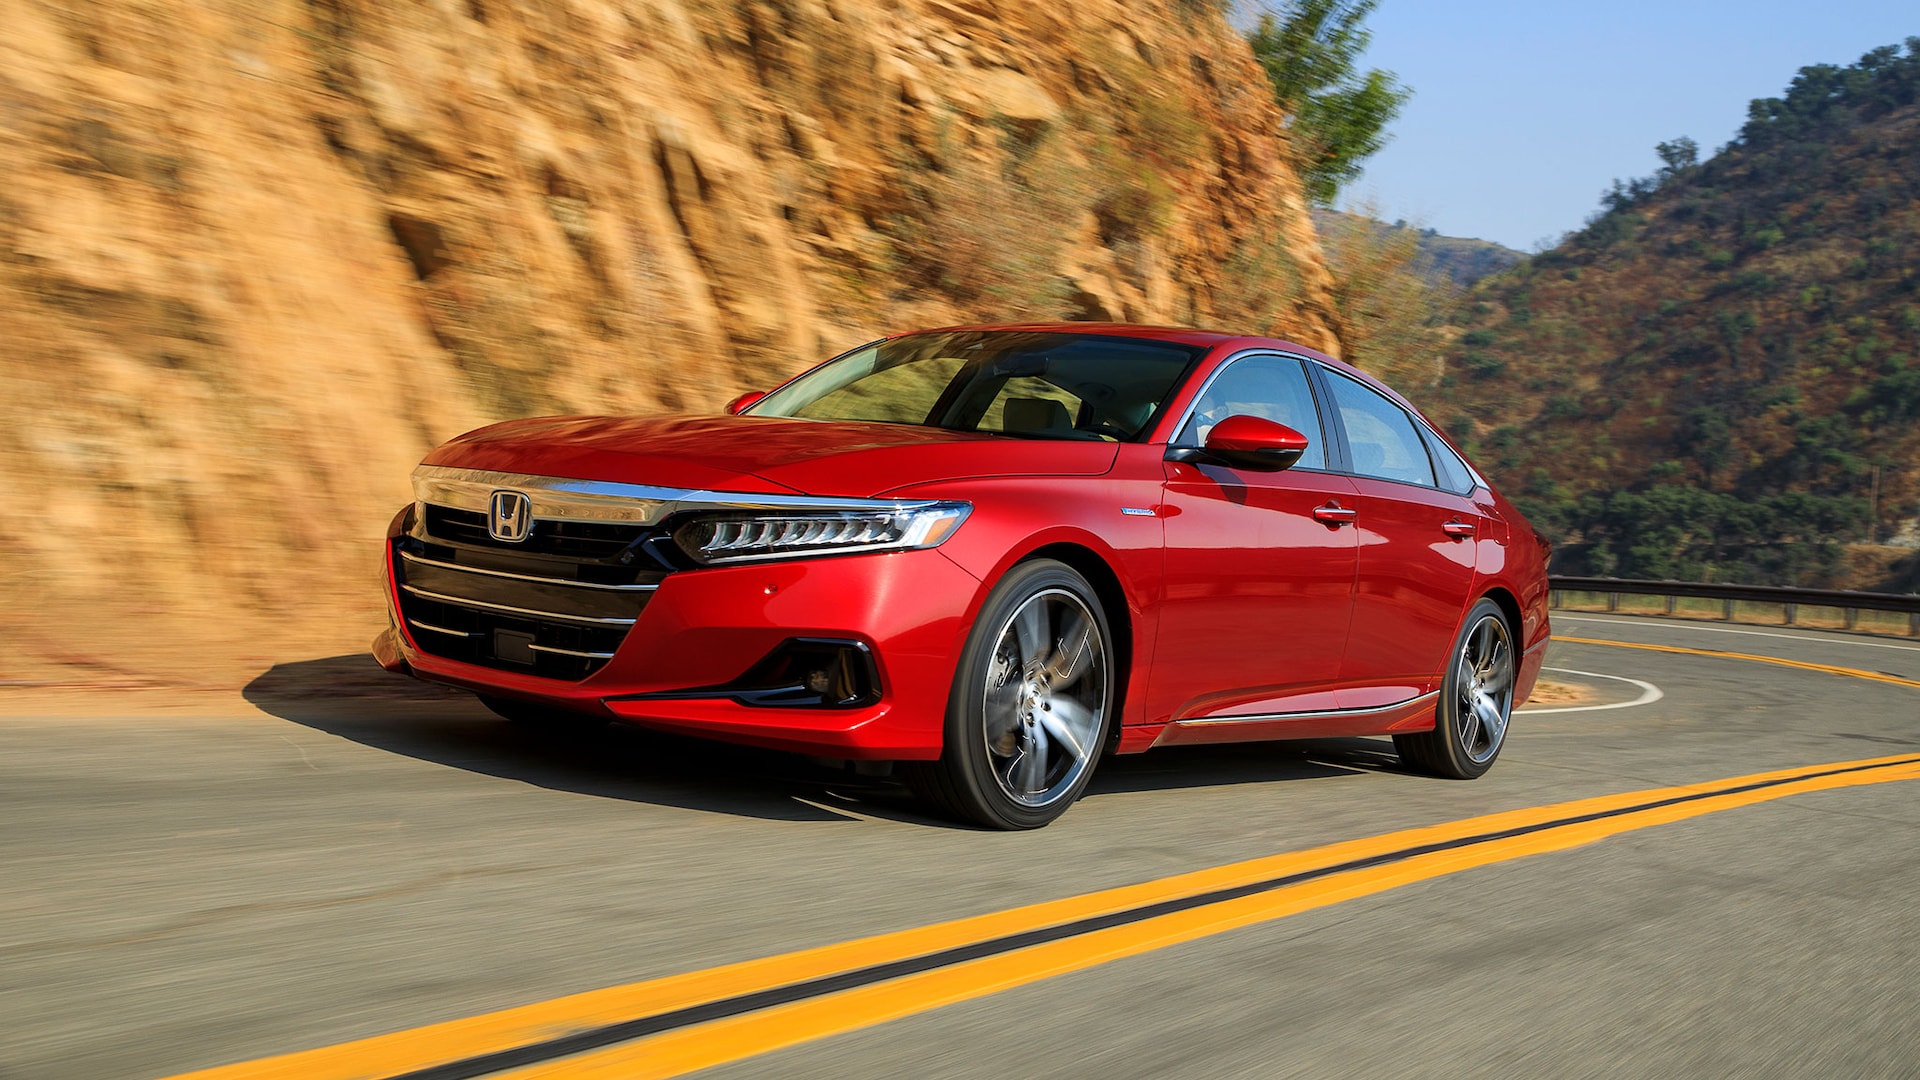 2021 Honda Accord Hybrid First Drive Review: This Is the Accord to Buy